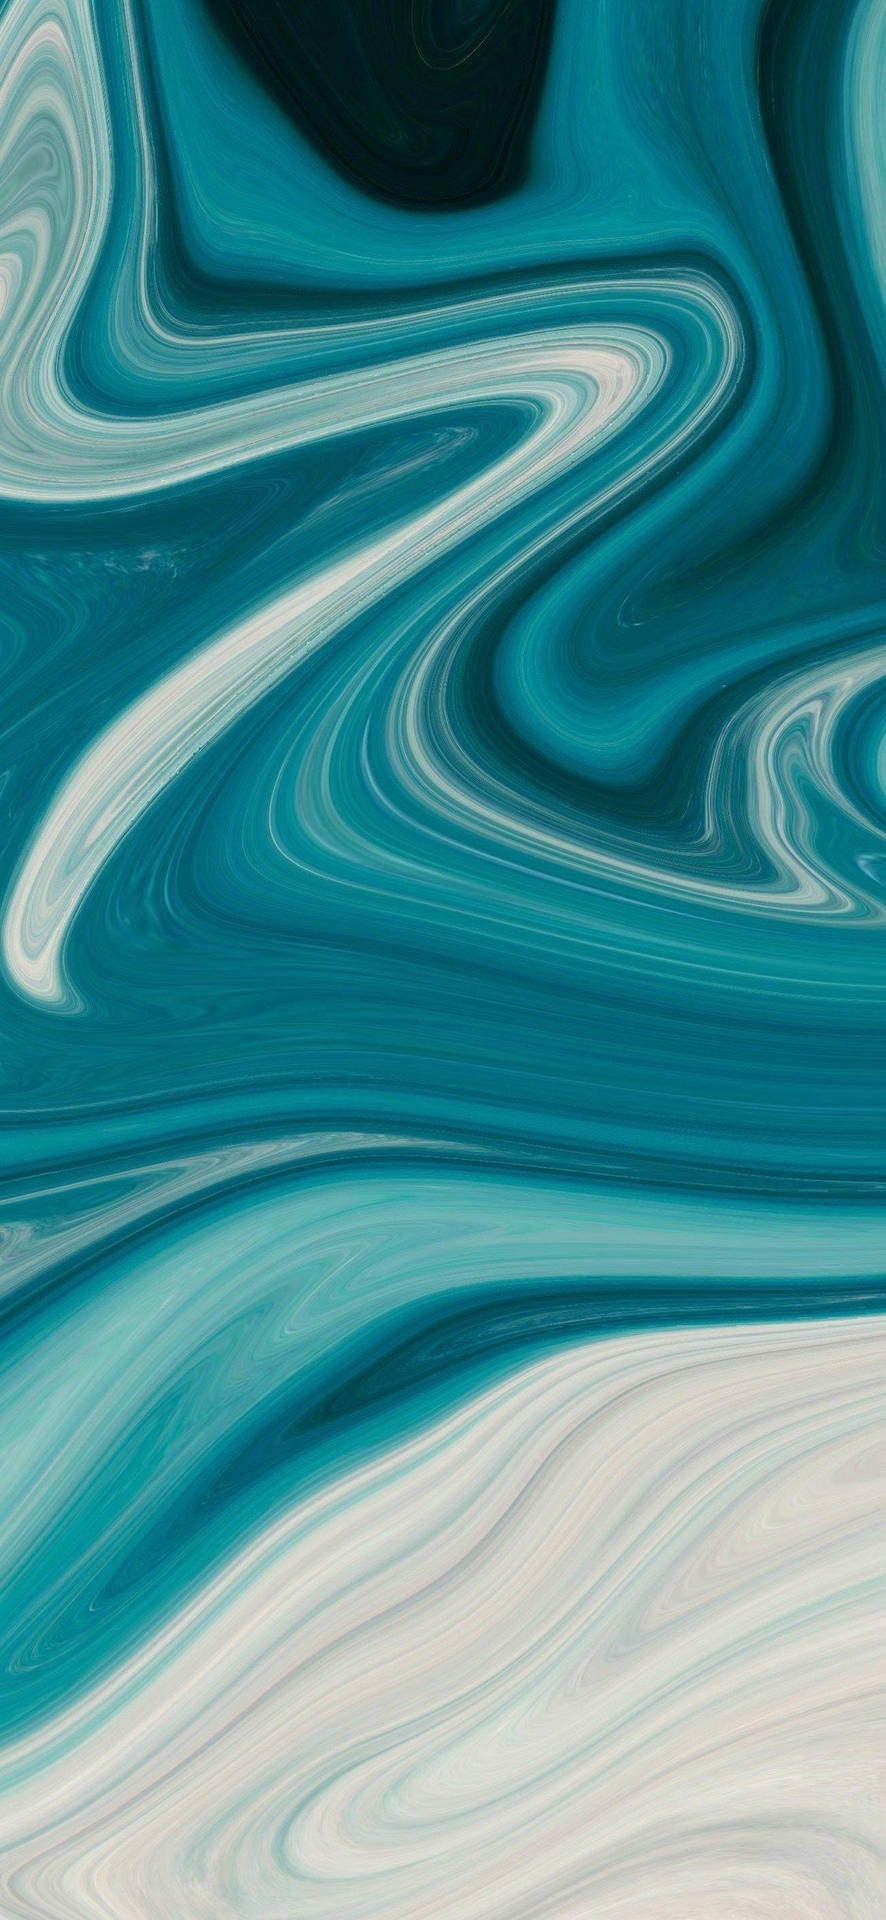 Ios 13 Blue And White Swirl Background